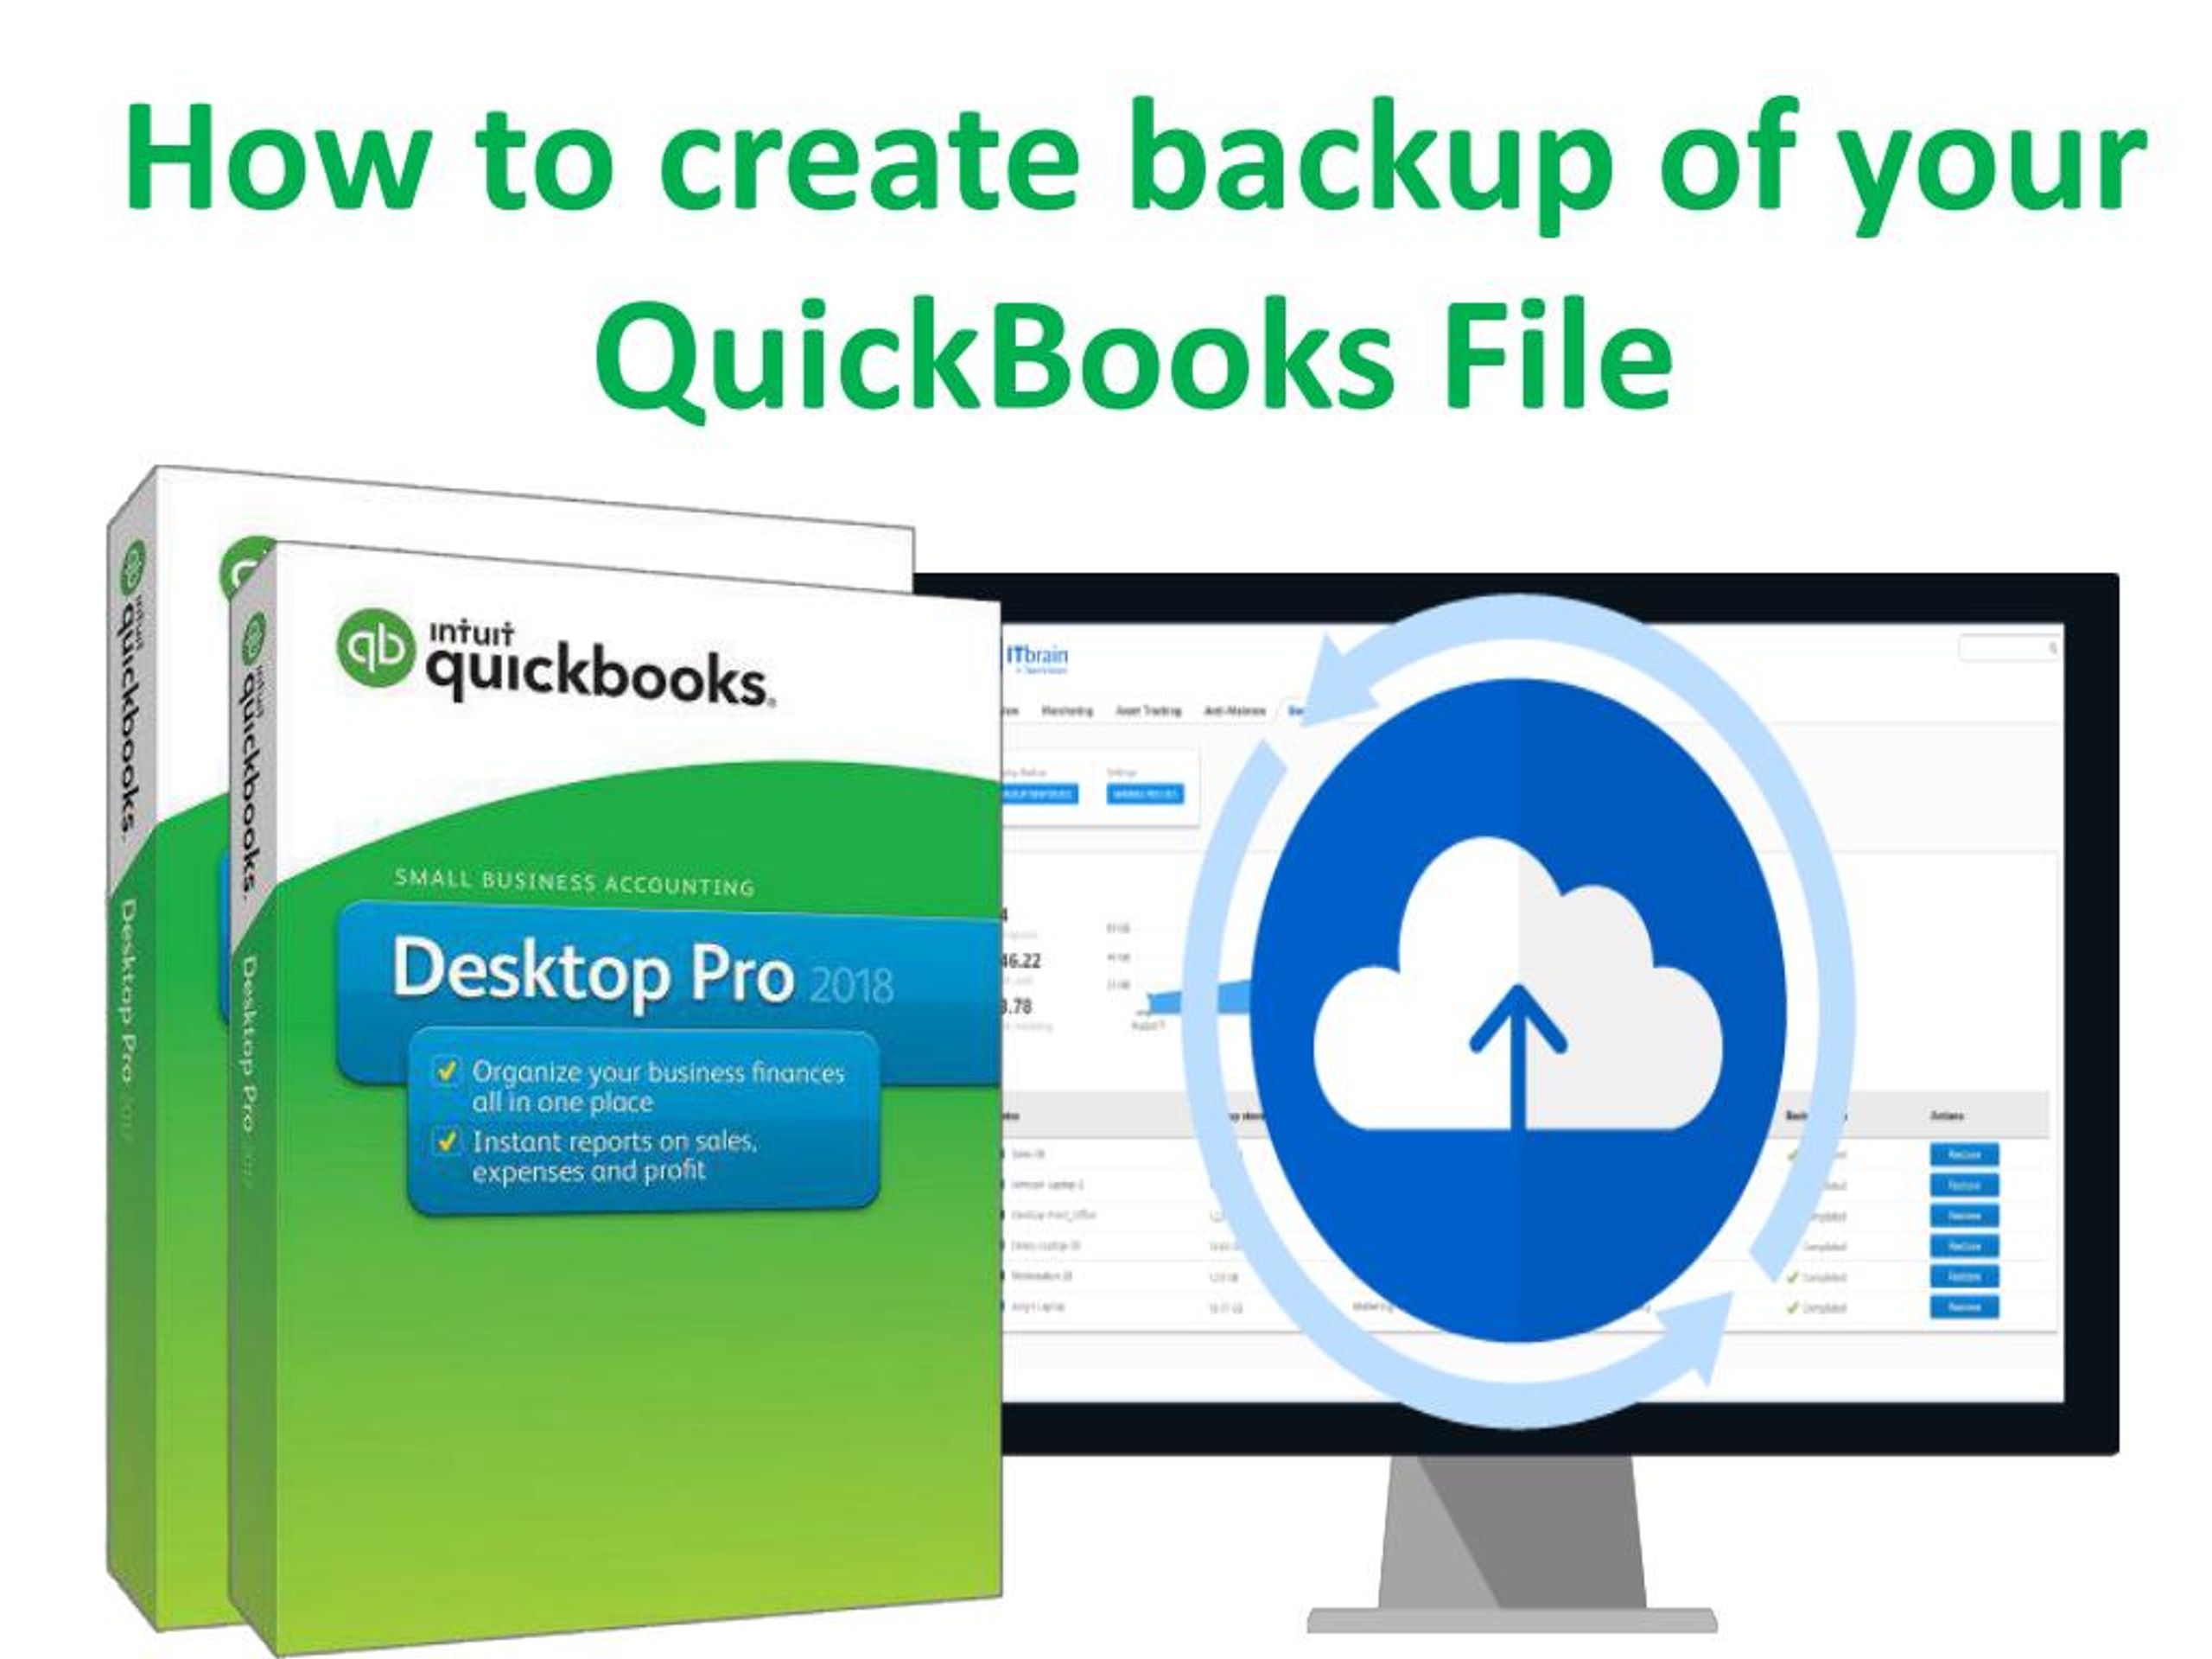 quickbooks file doctor taking a long time